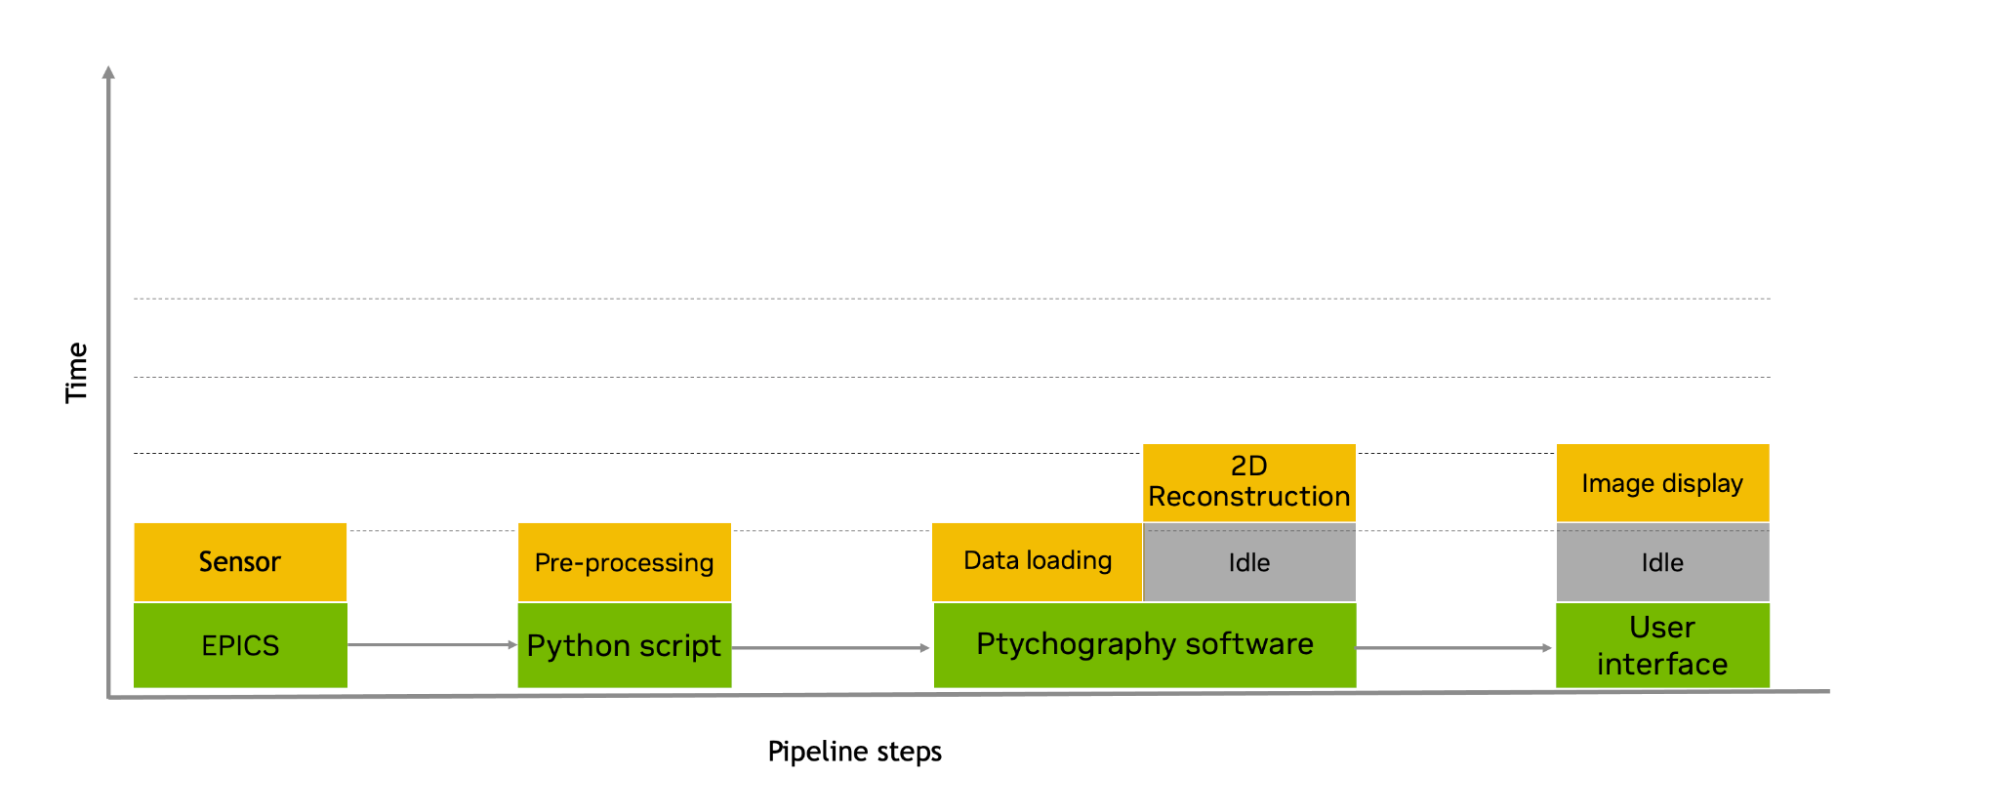 The ptychography workflow has been redone replacing all of the file-based IO stages between steps with streaming IO.  The steps are Sensor processing with EPICS,  preprocessing which is a Python script, data loading and 2D reconstruction which are embodied in the ptychography software, and Image display which provides the user interface.  The total time to run is much lower that the original file-based workflow and is shown on the vertical axis with smaller and fewer idle time periods.
